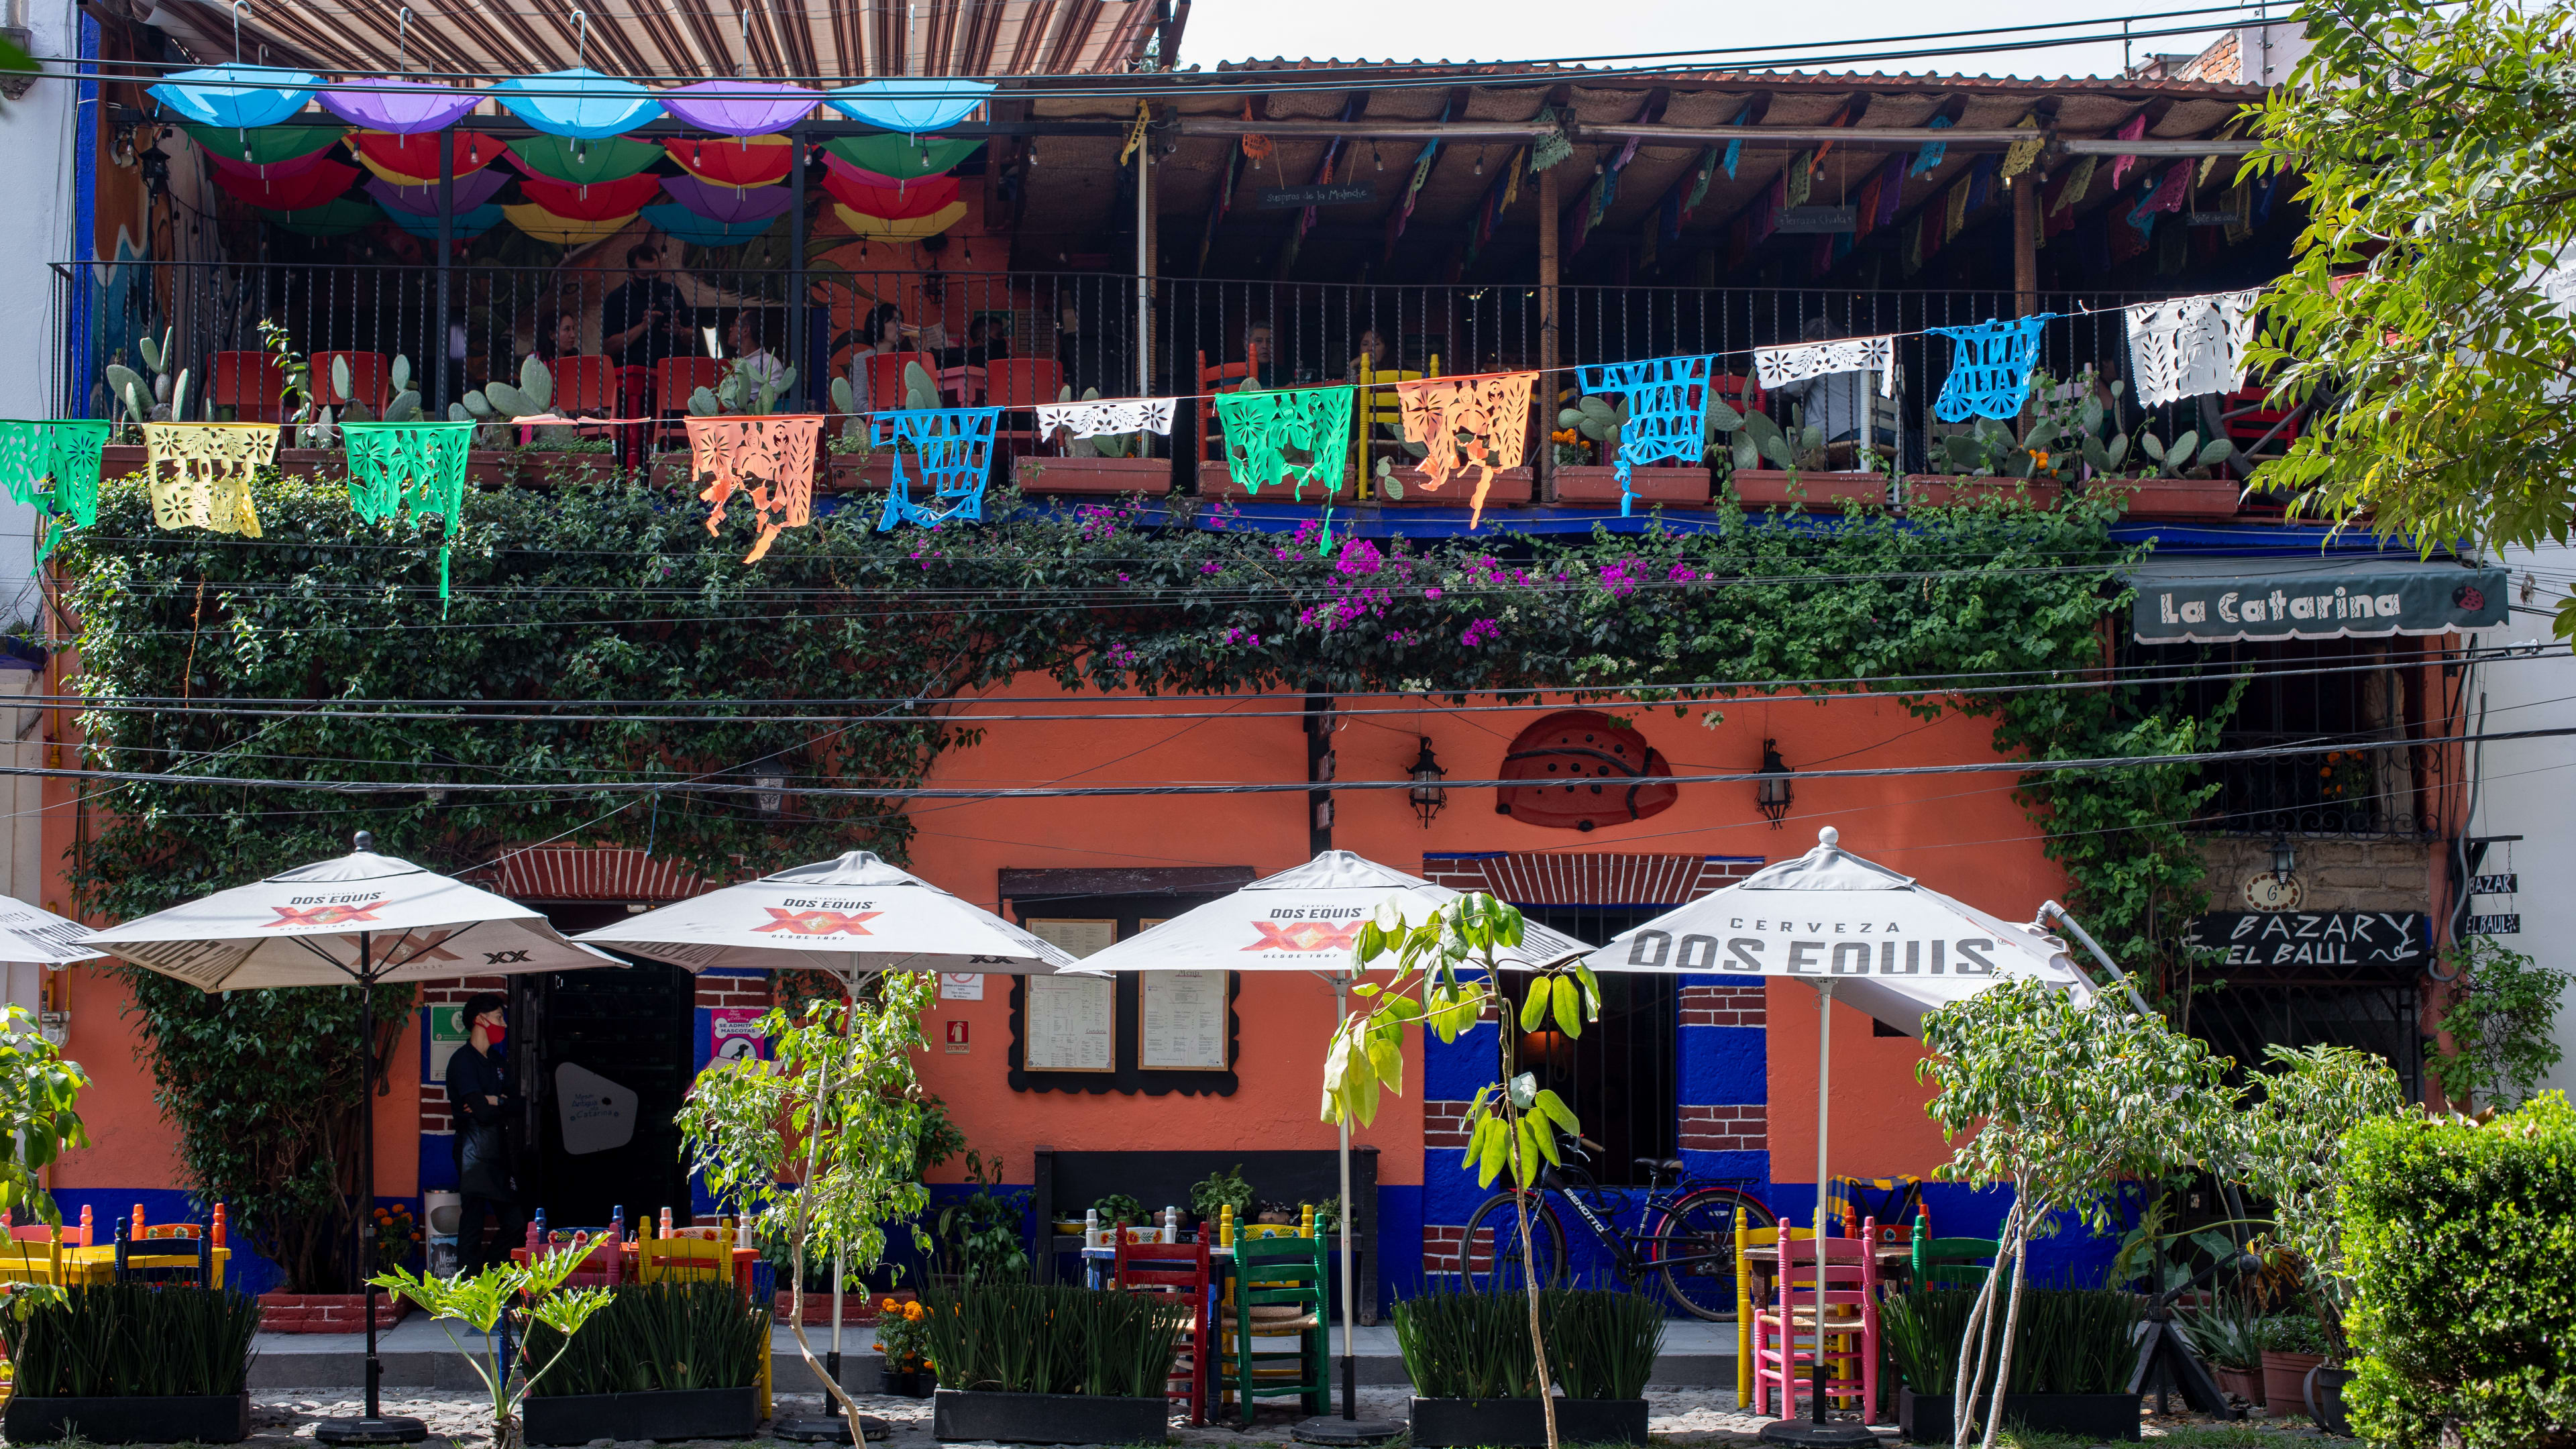 The exterior of a colorful three-story restaurant in Mexico City